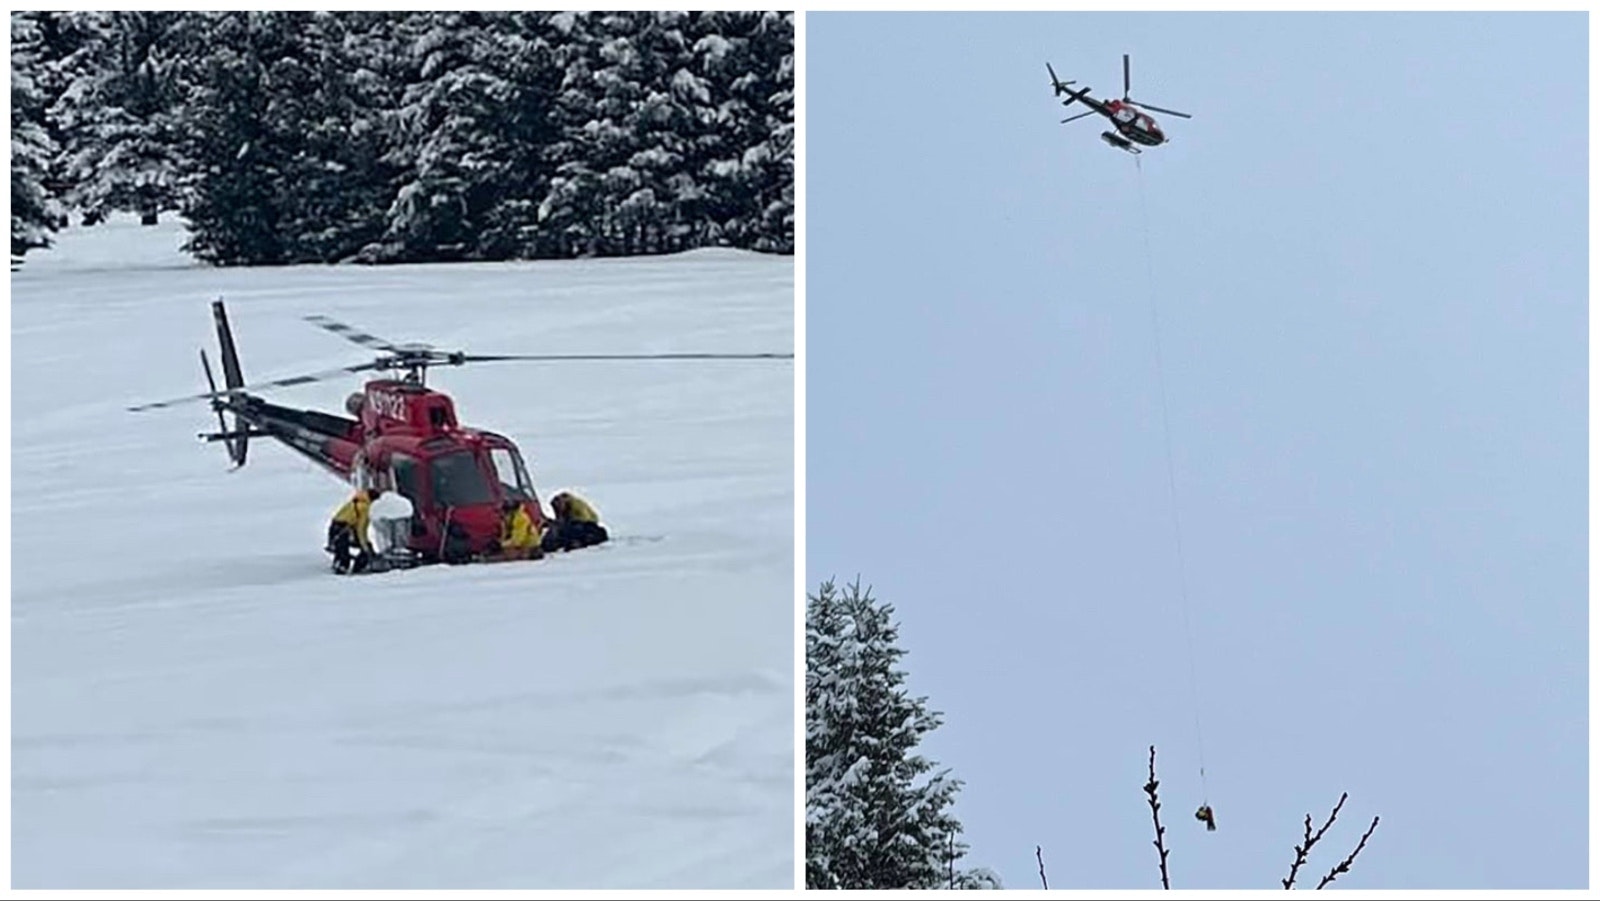 Teton County Search and Rescue respond to a Sunday morning avalanche that buried a backcountry skier.